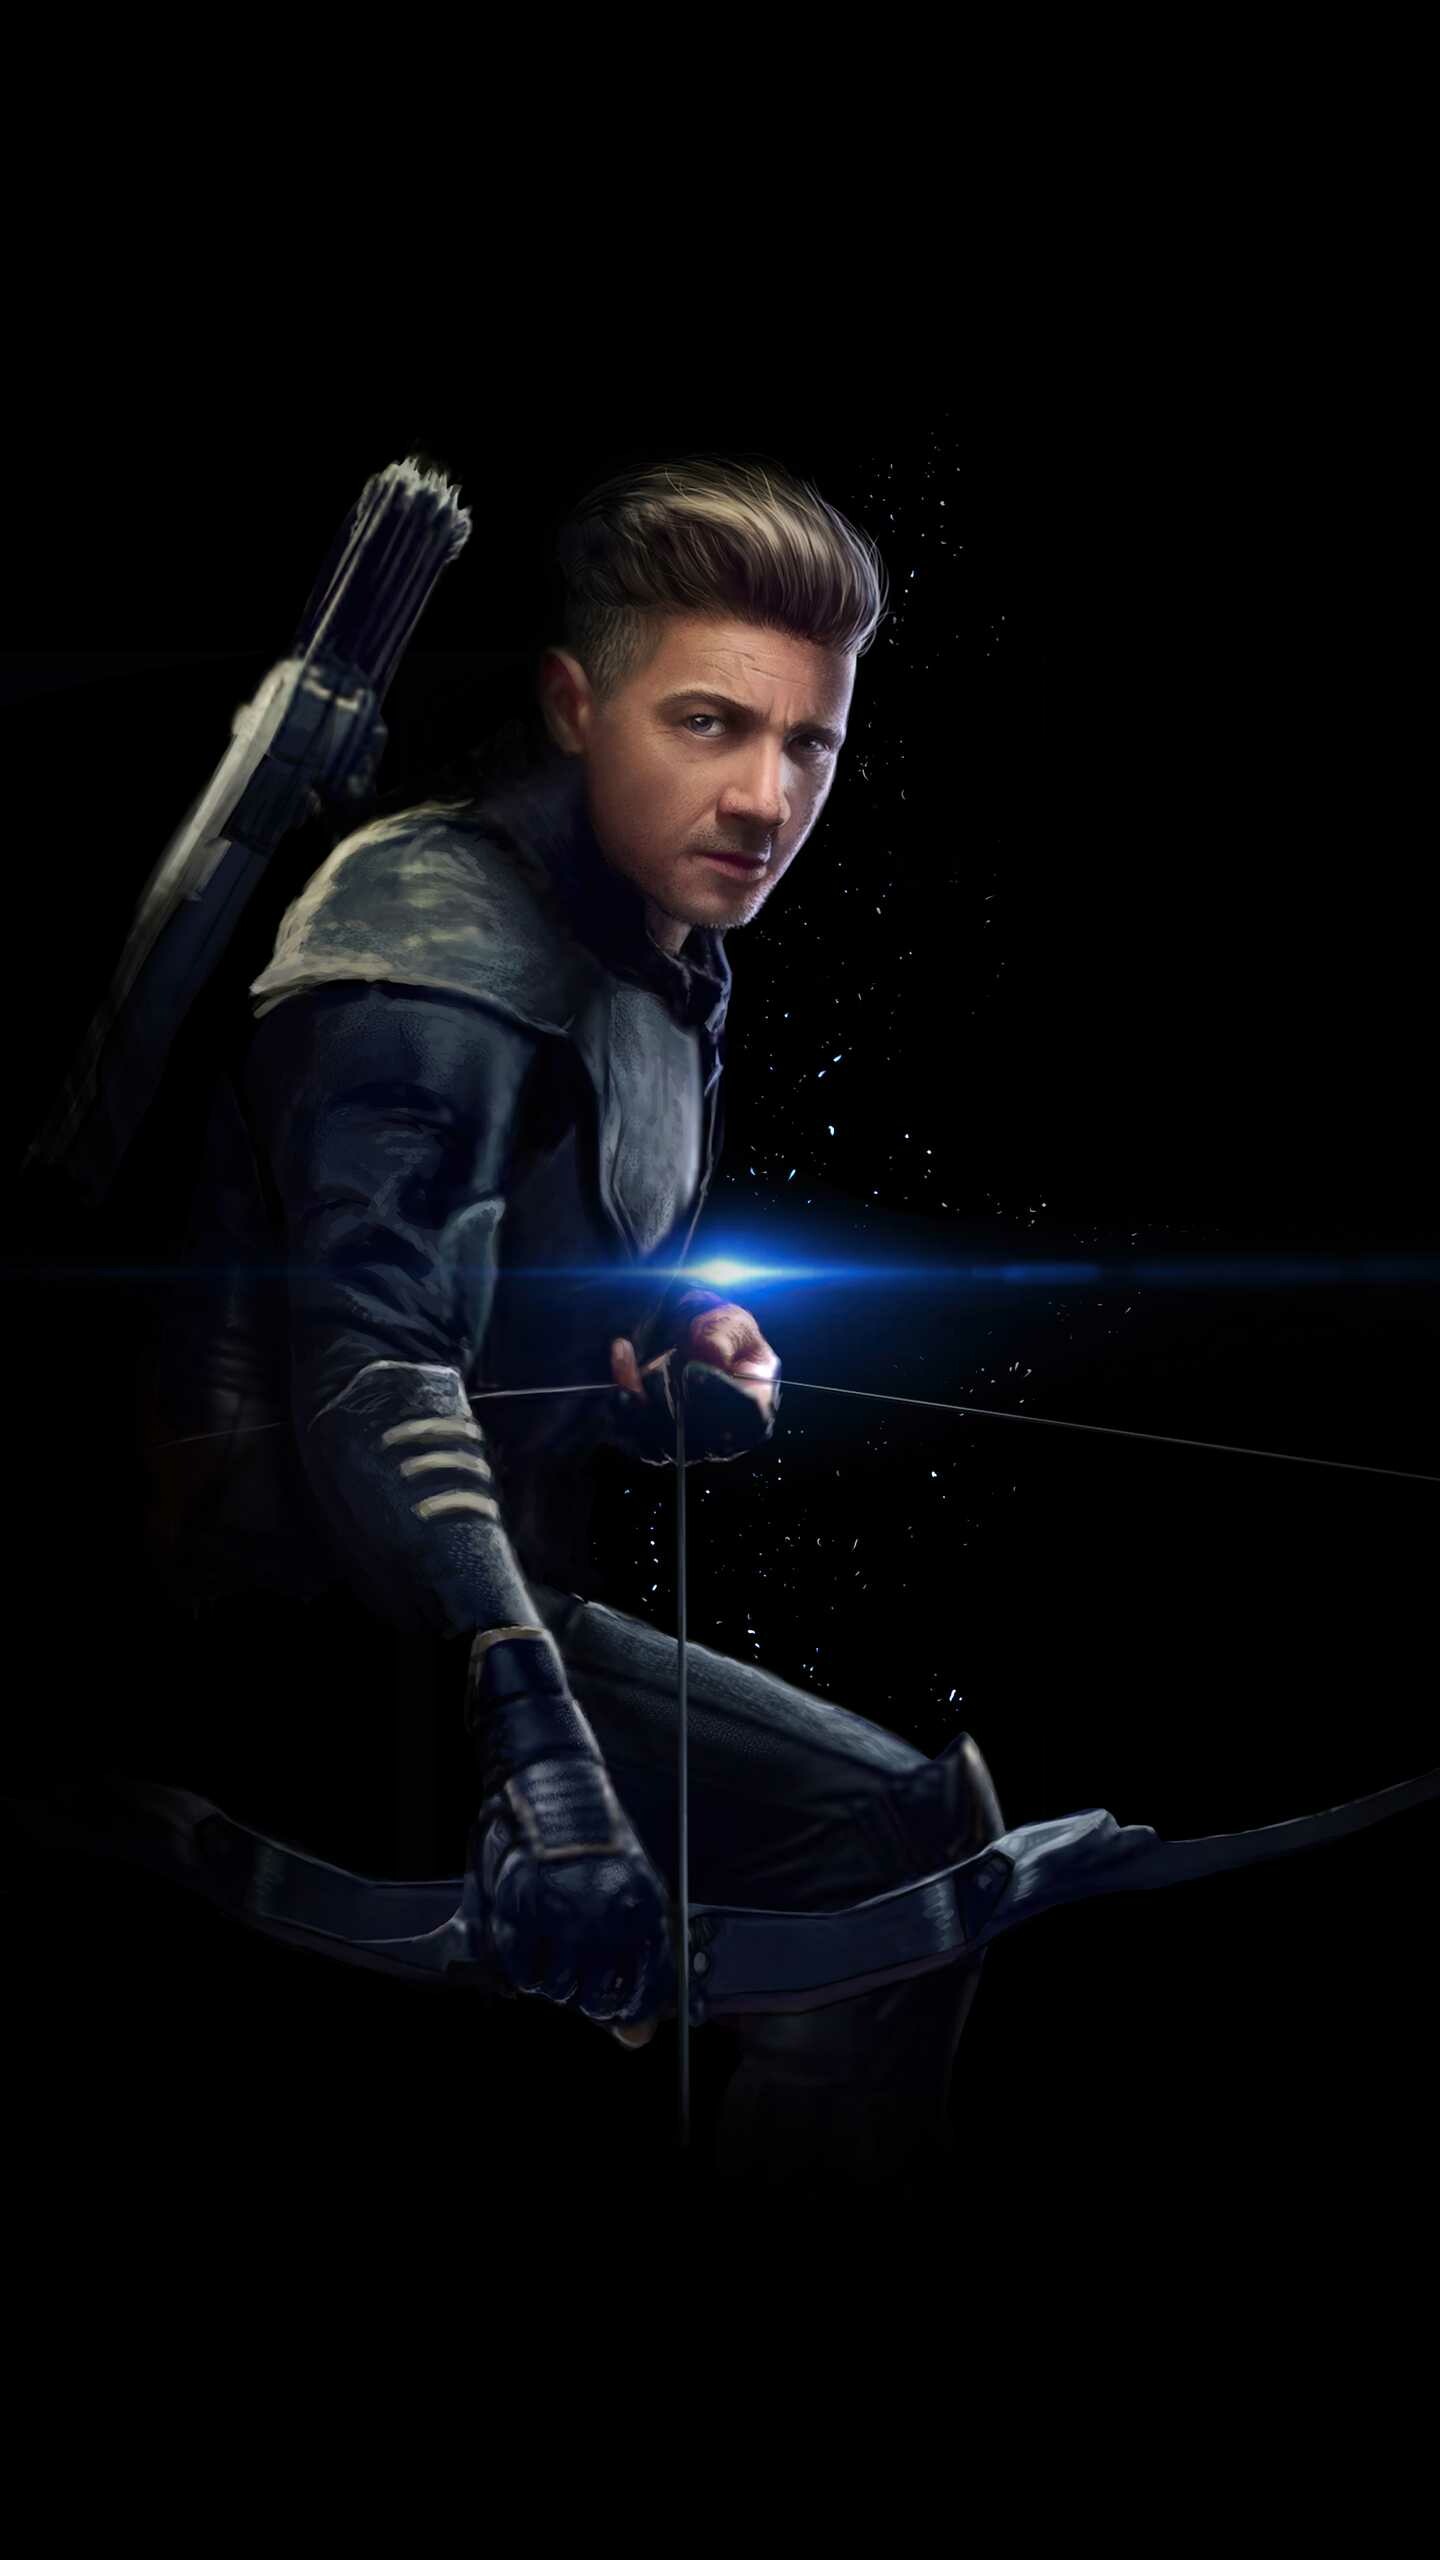 Hawkeye: Ranked at №44 on IGN's Top 100 Comic Book Heroes list. 1440x2560 HD Background.